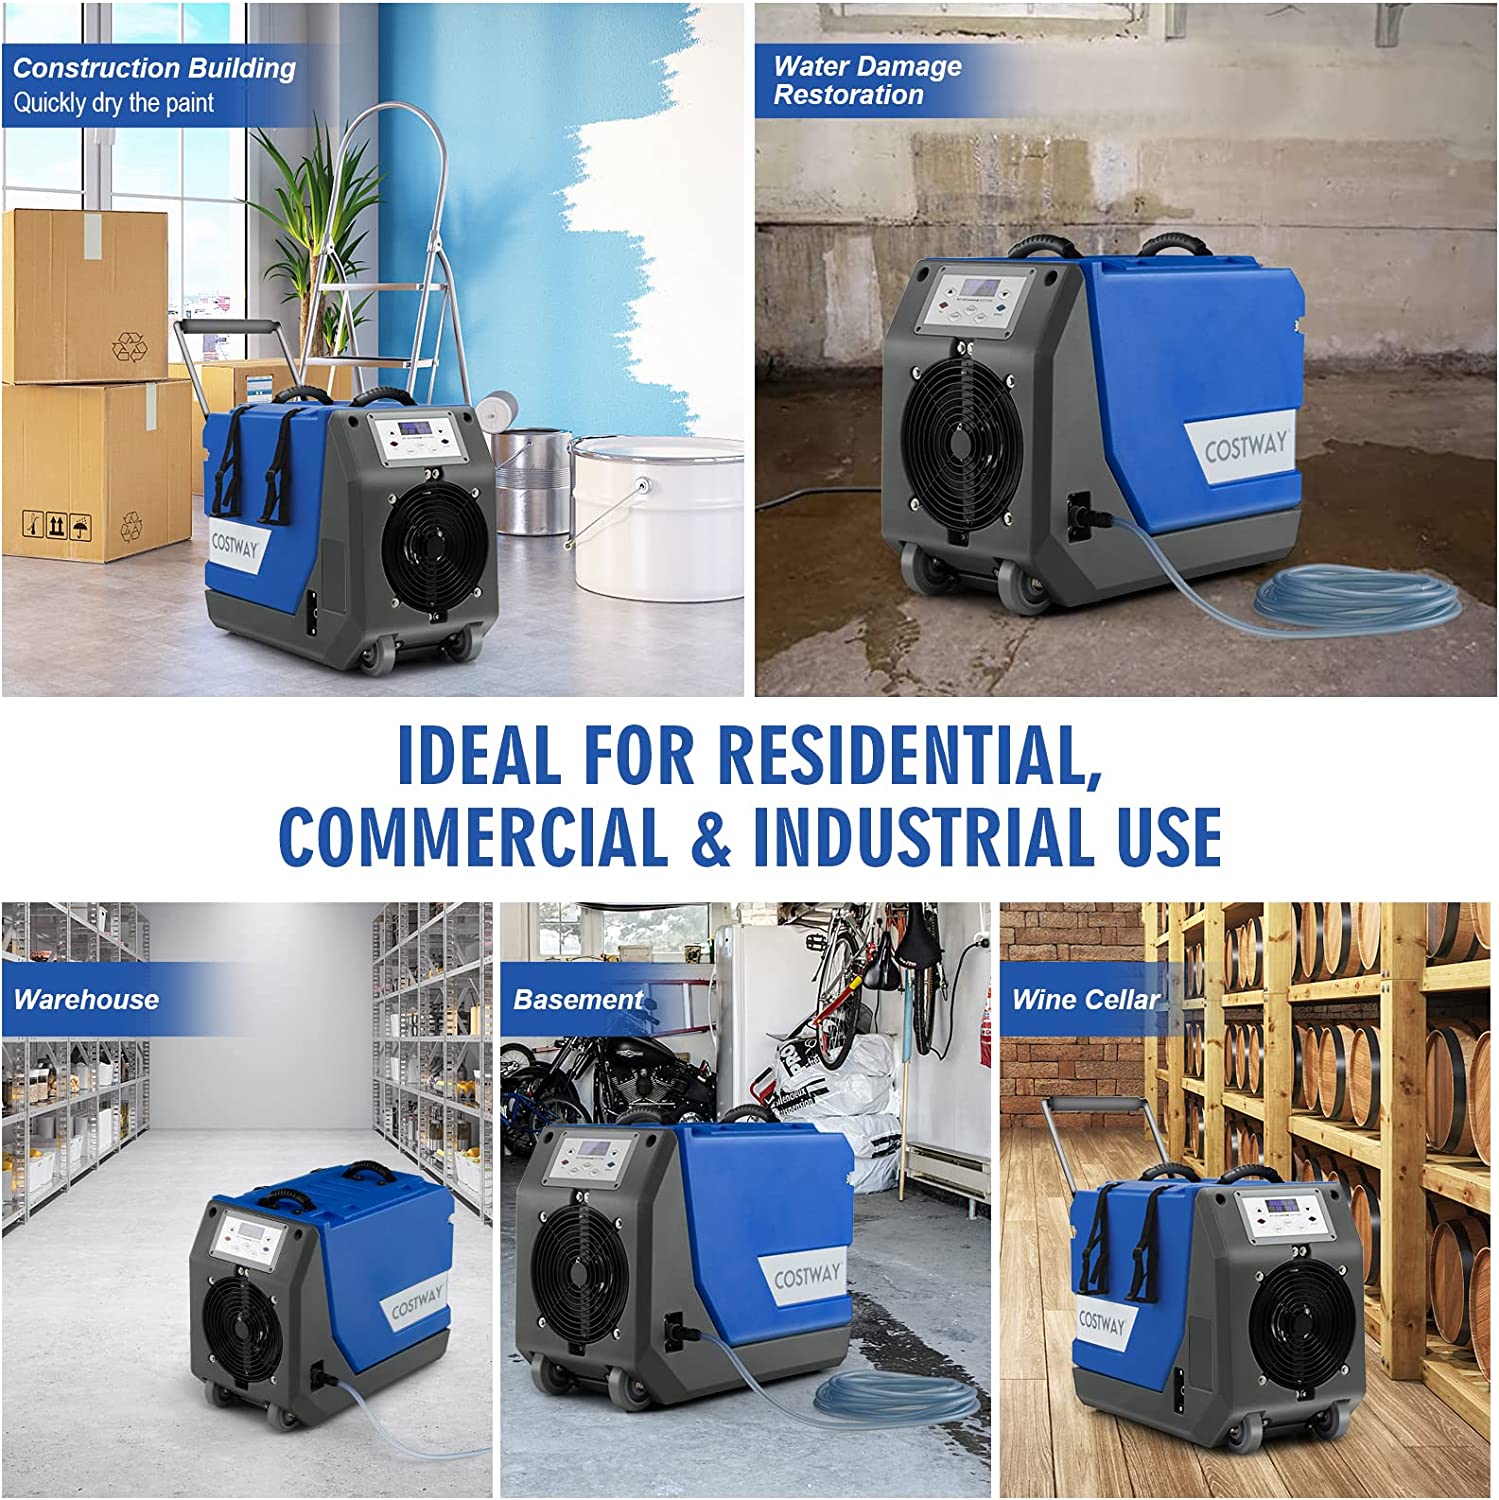 Chairliving 180 PPD Portable Commercial Dehumidifier Rotational Molded Industrial Dehumidifier with Pump and Wheels for Basement Warehouse